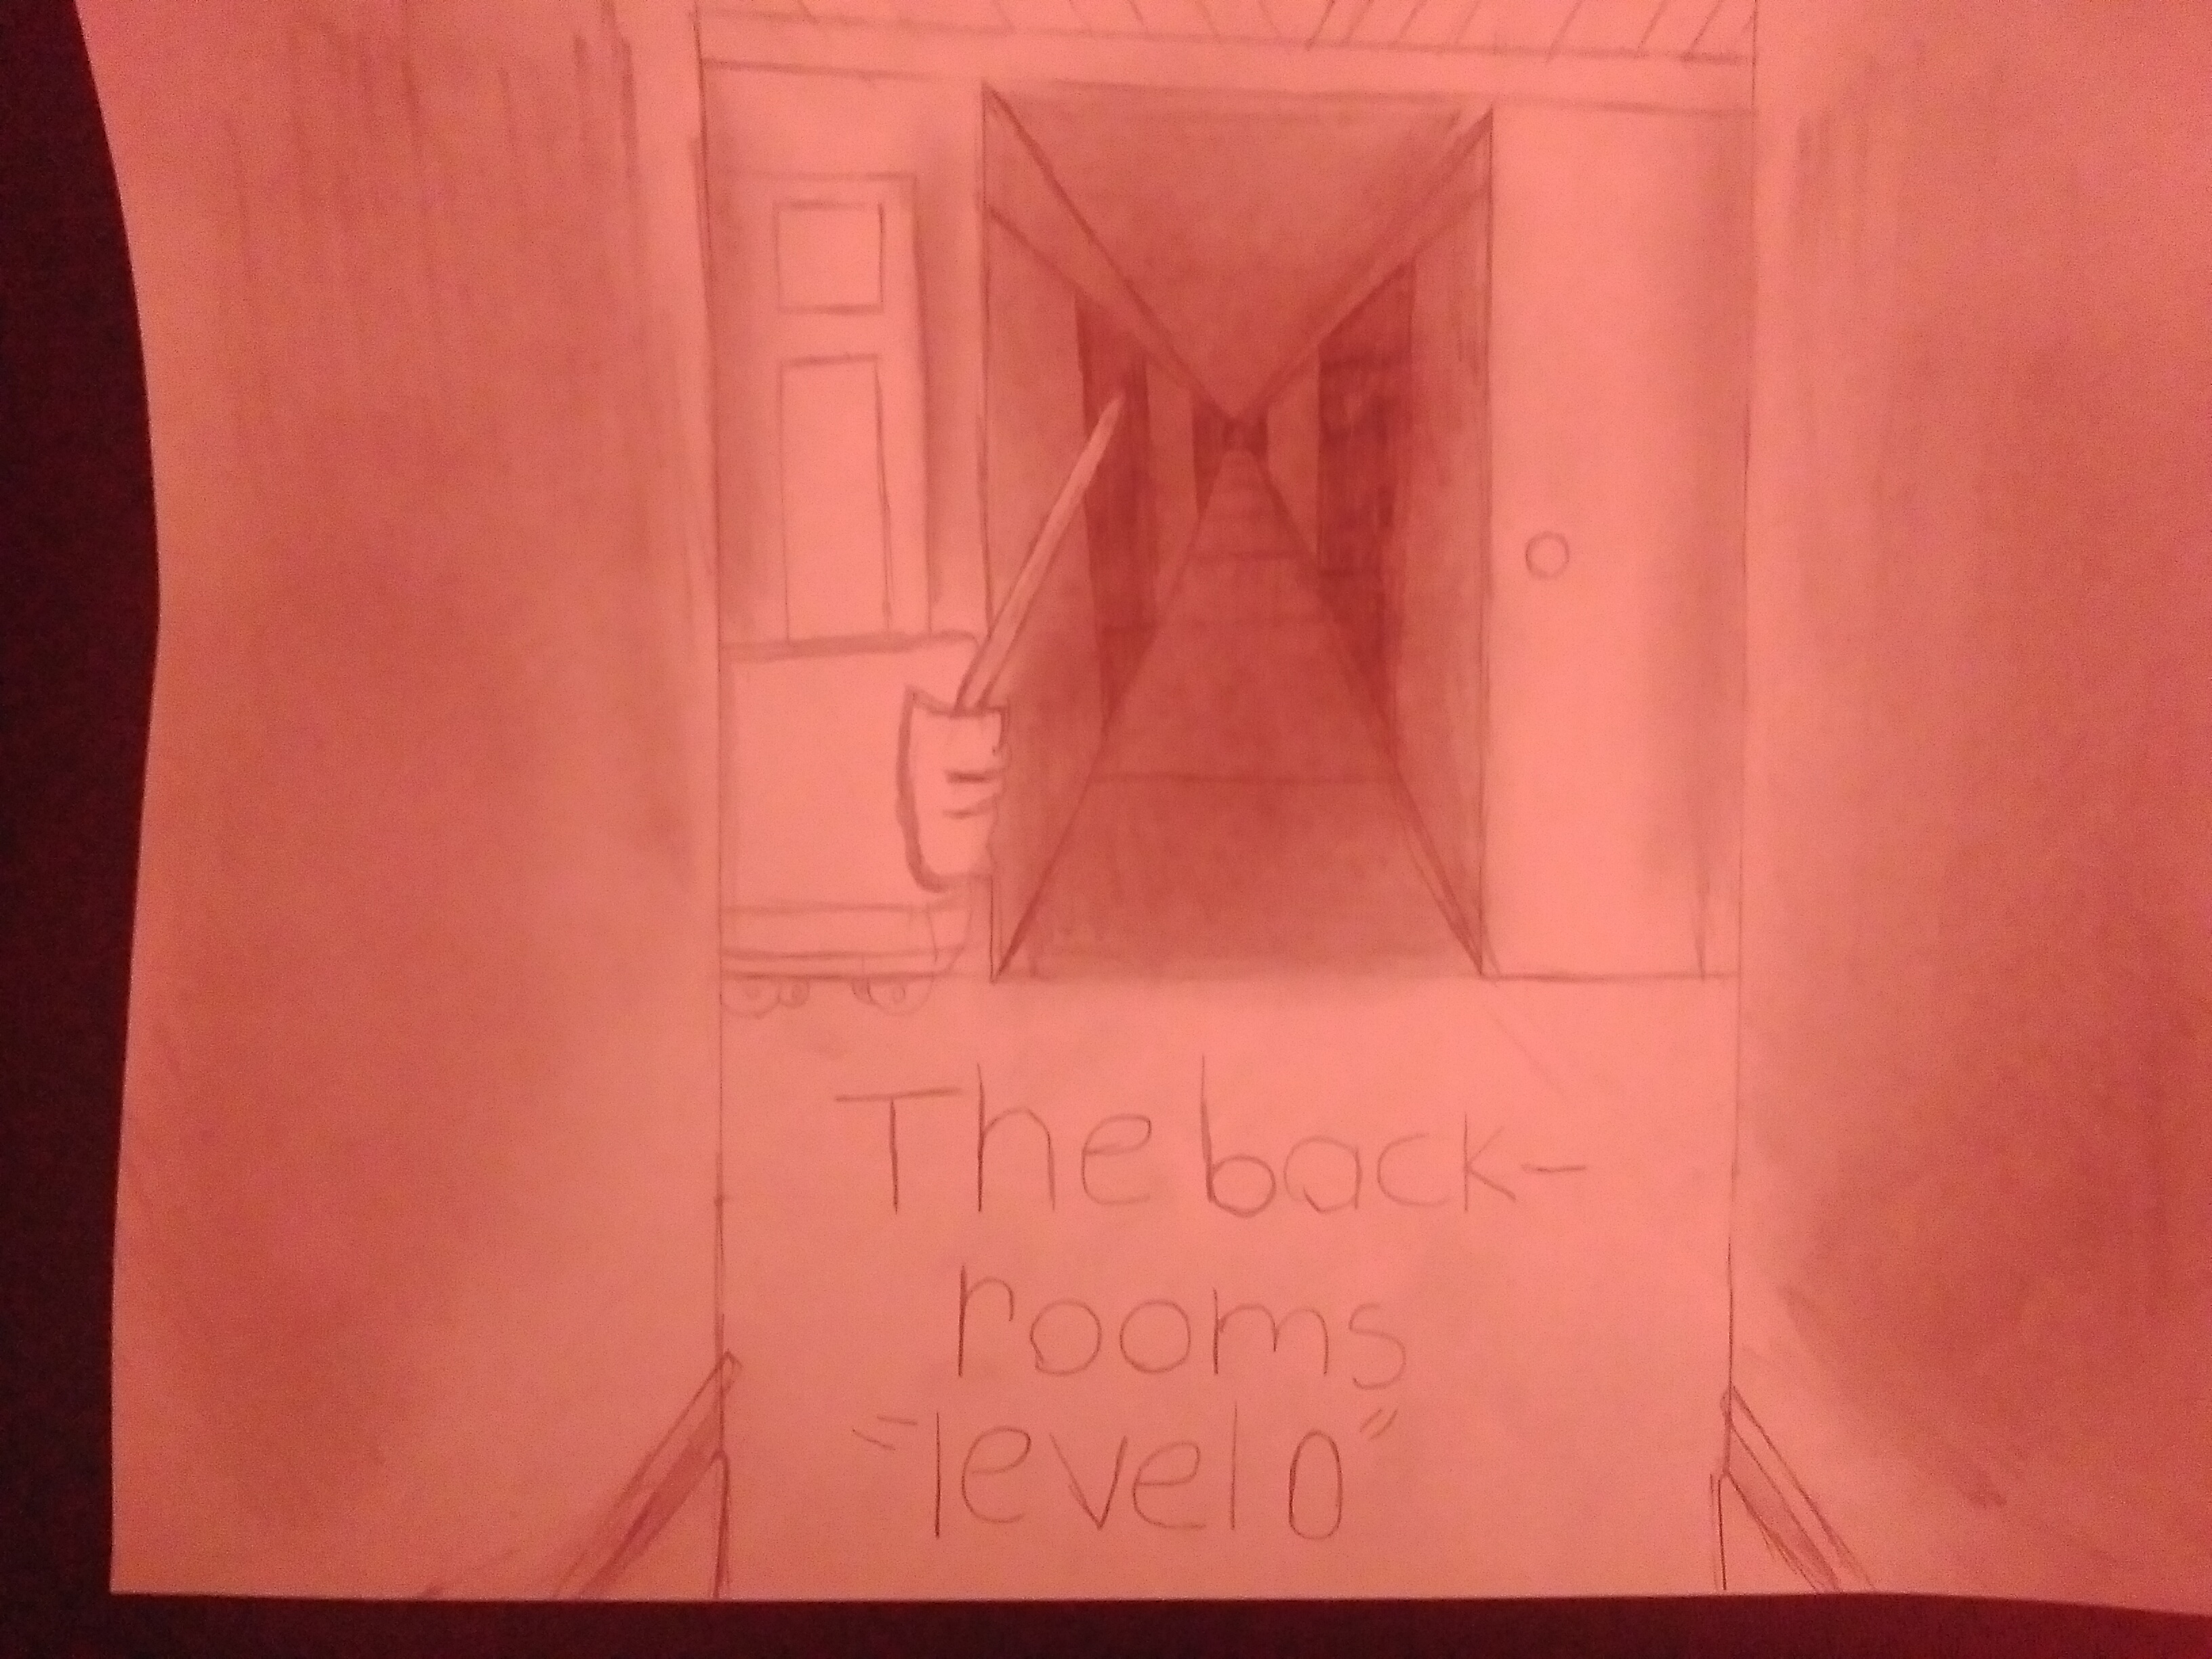 Backrooms Level 0 by Drakesonofthedragon2 on DeviantArt